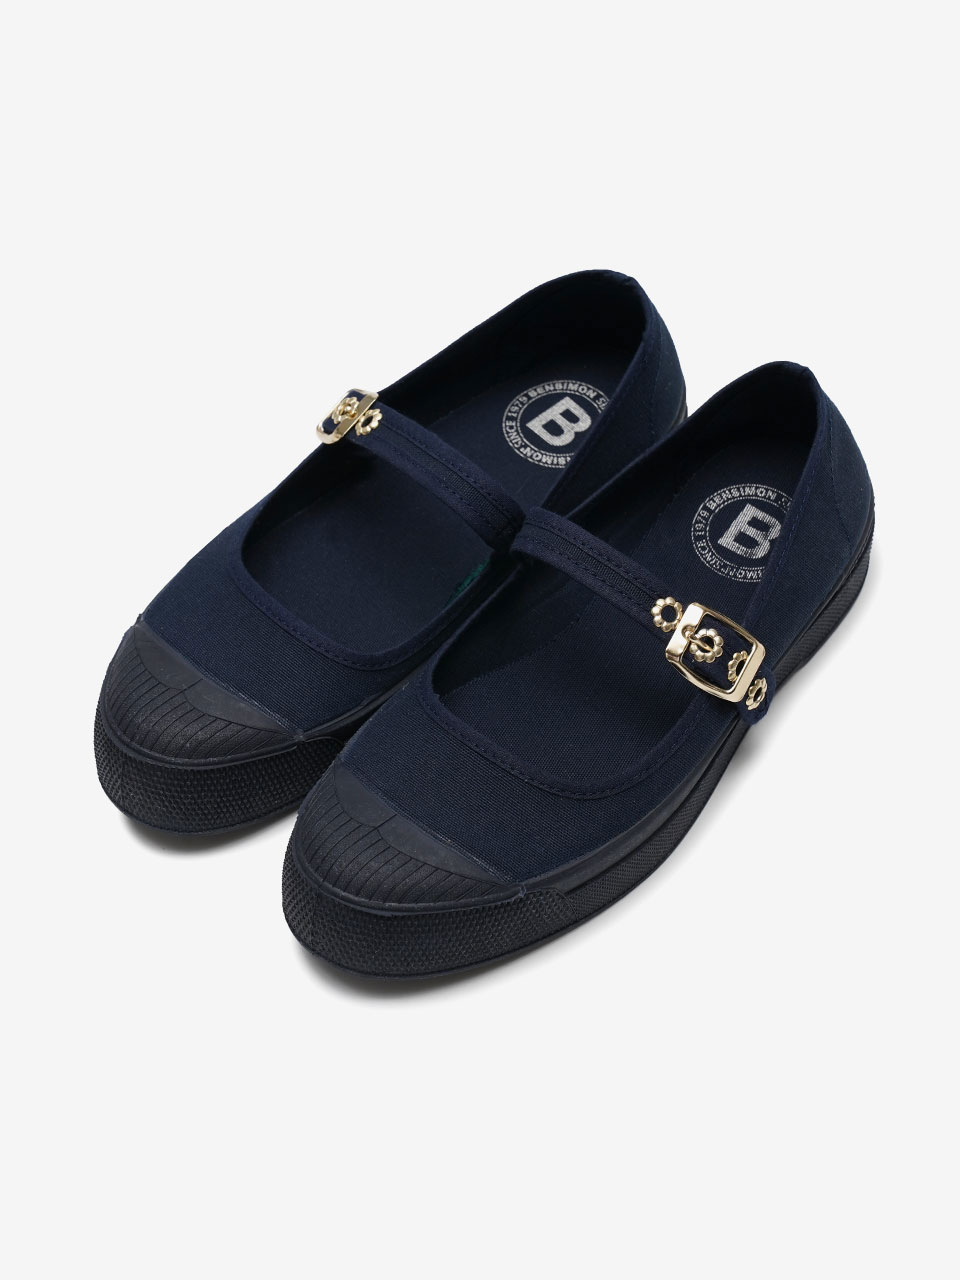 LIMITED SALOME B79 - NAVY